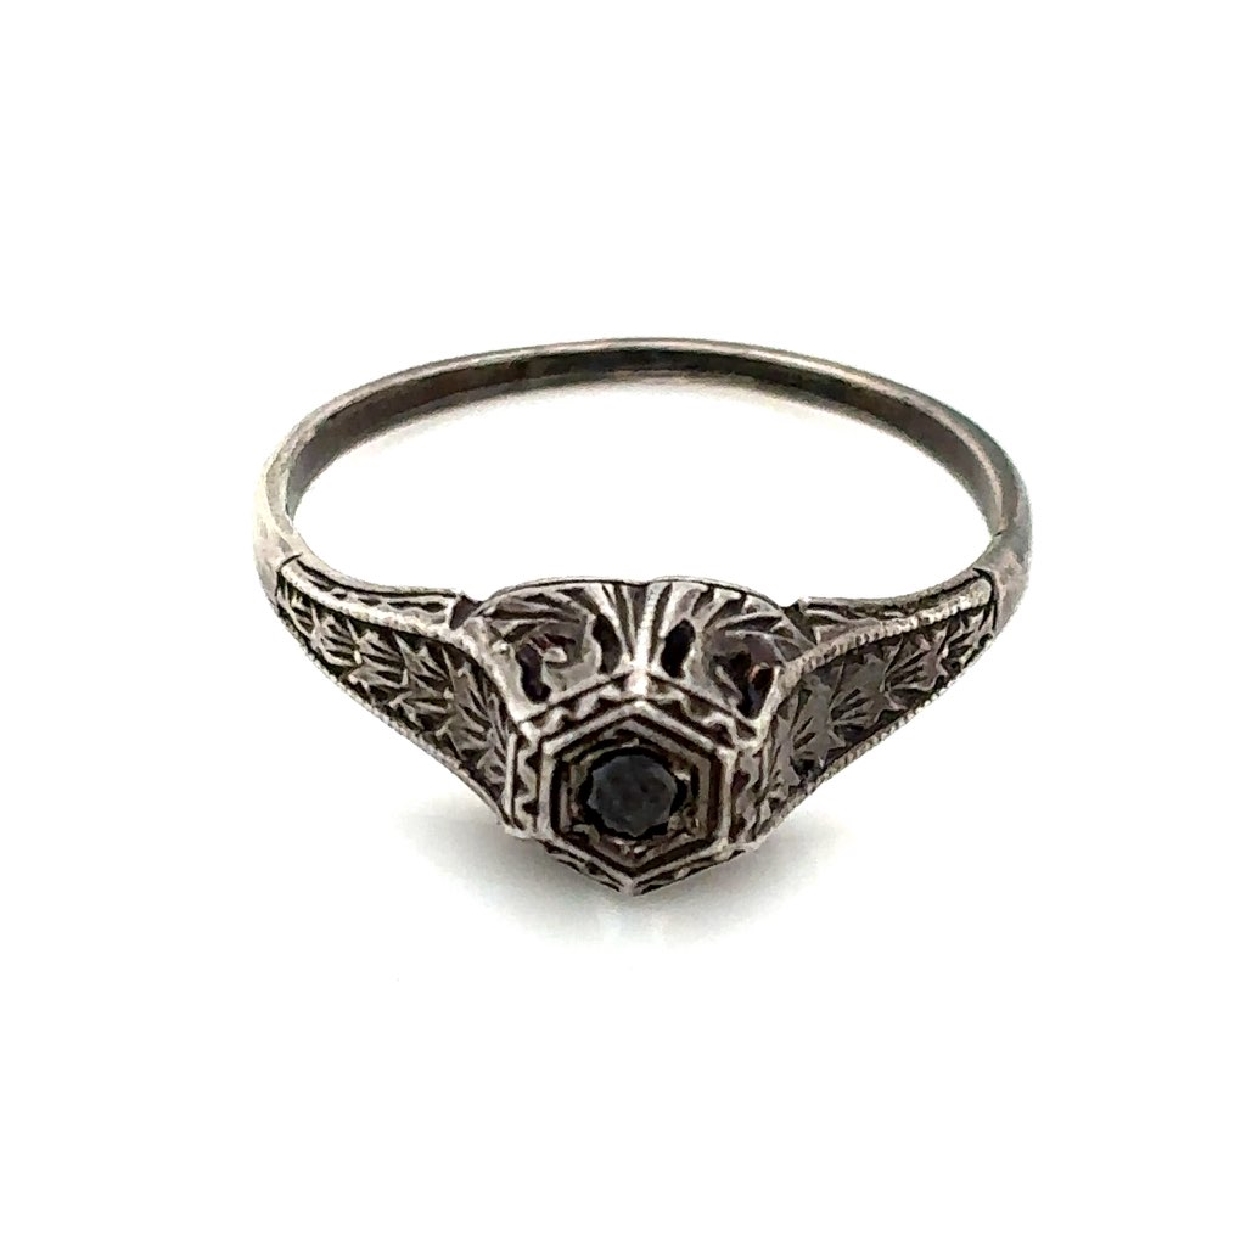 Victorian Sterling Silver Black Diamond Ring with Filigree Details

Size 6.25 